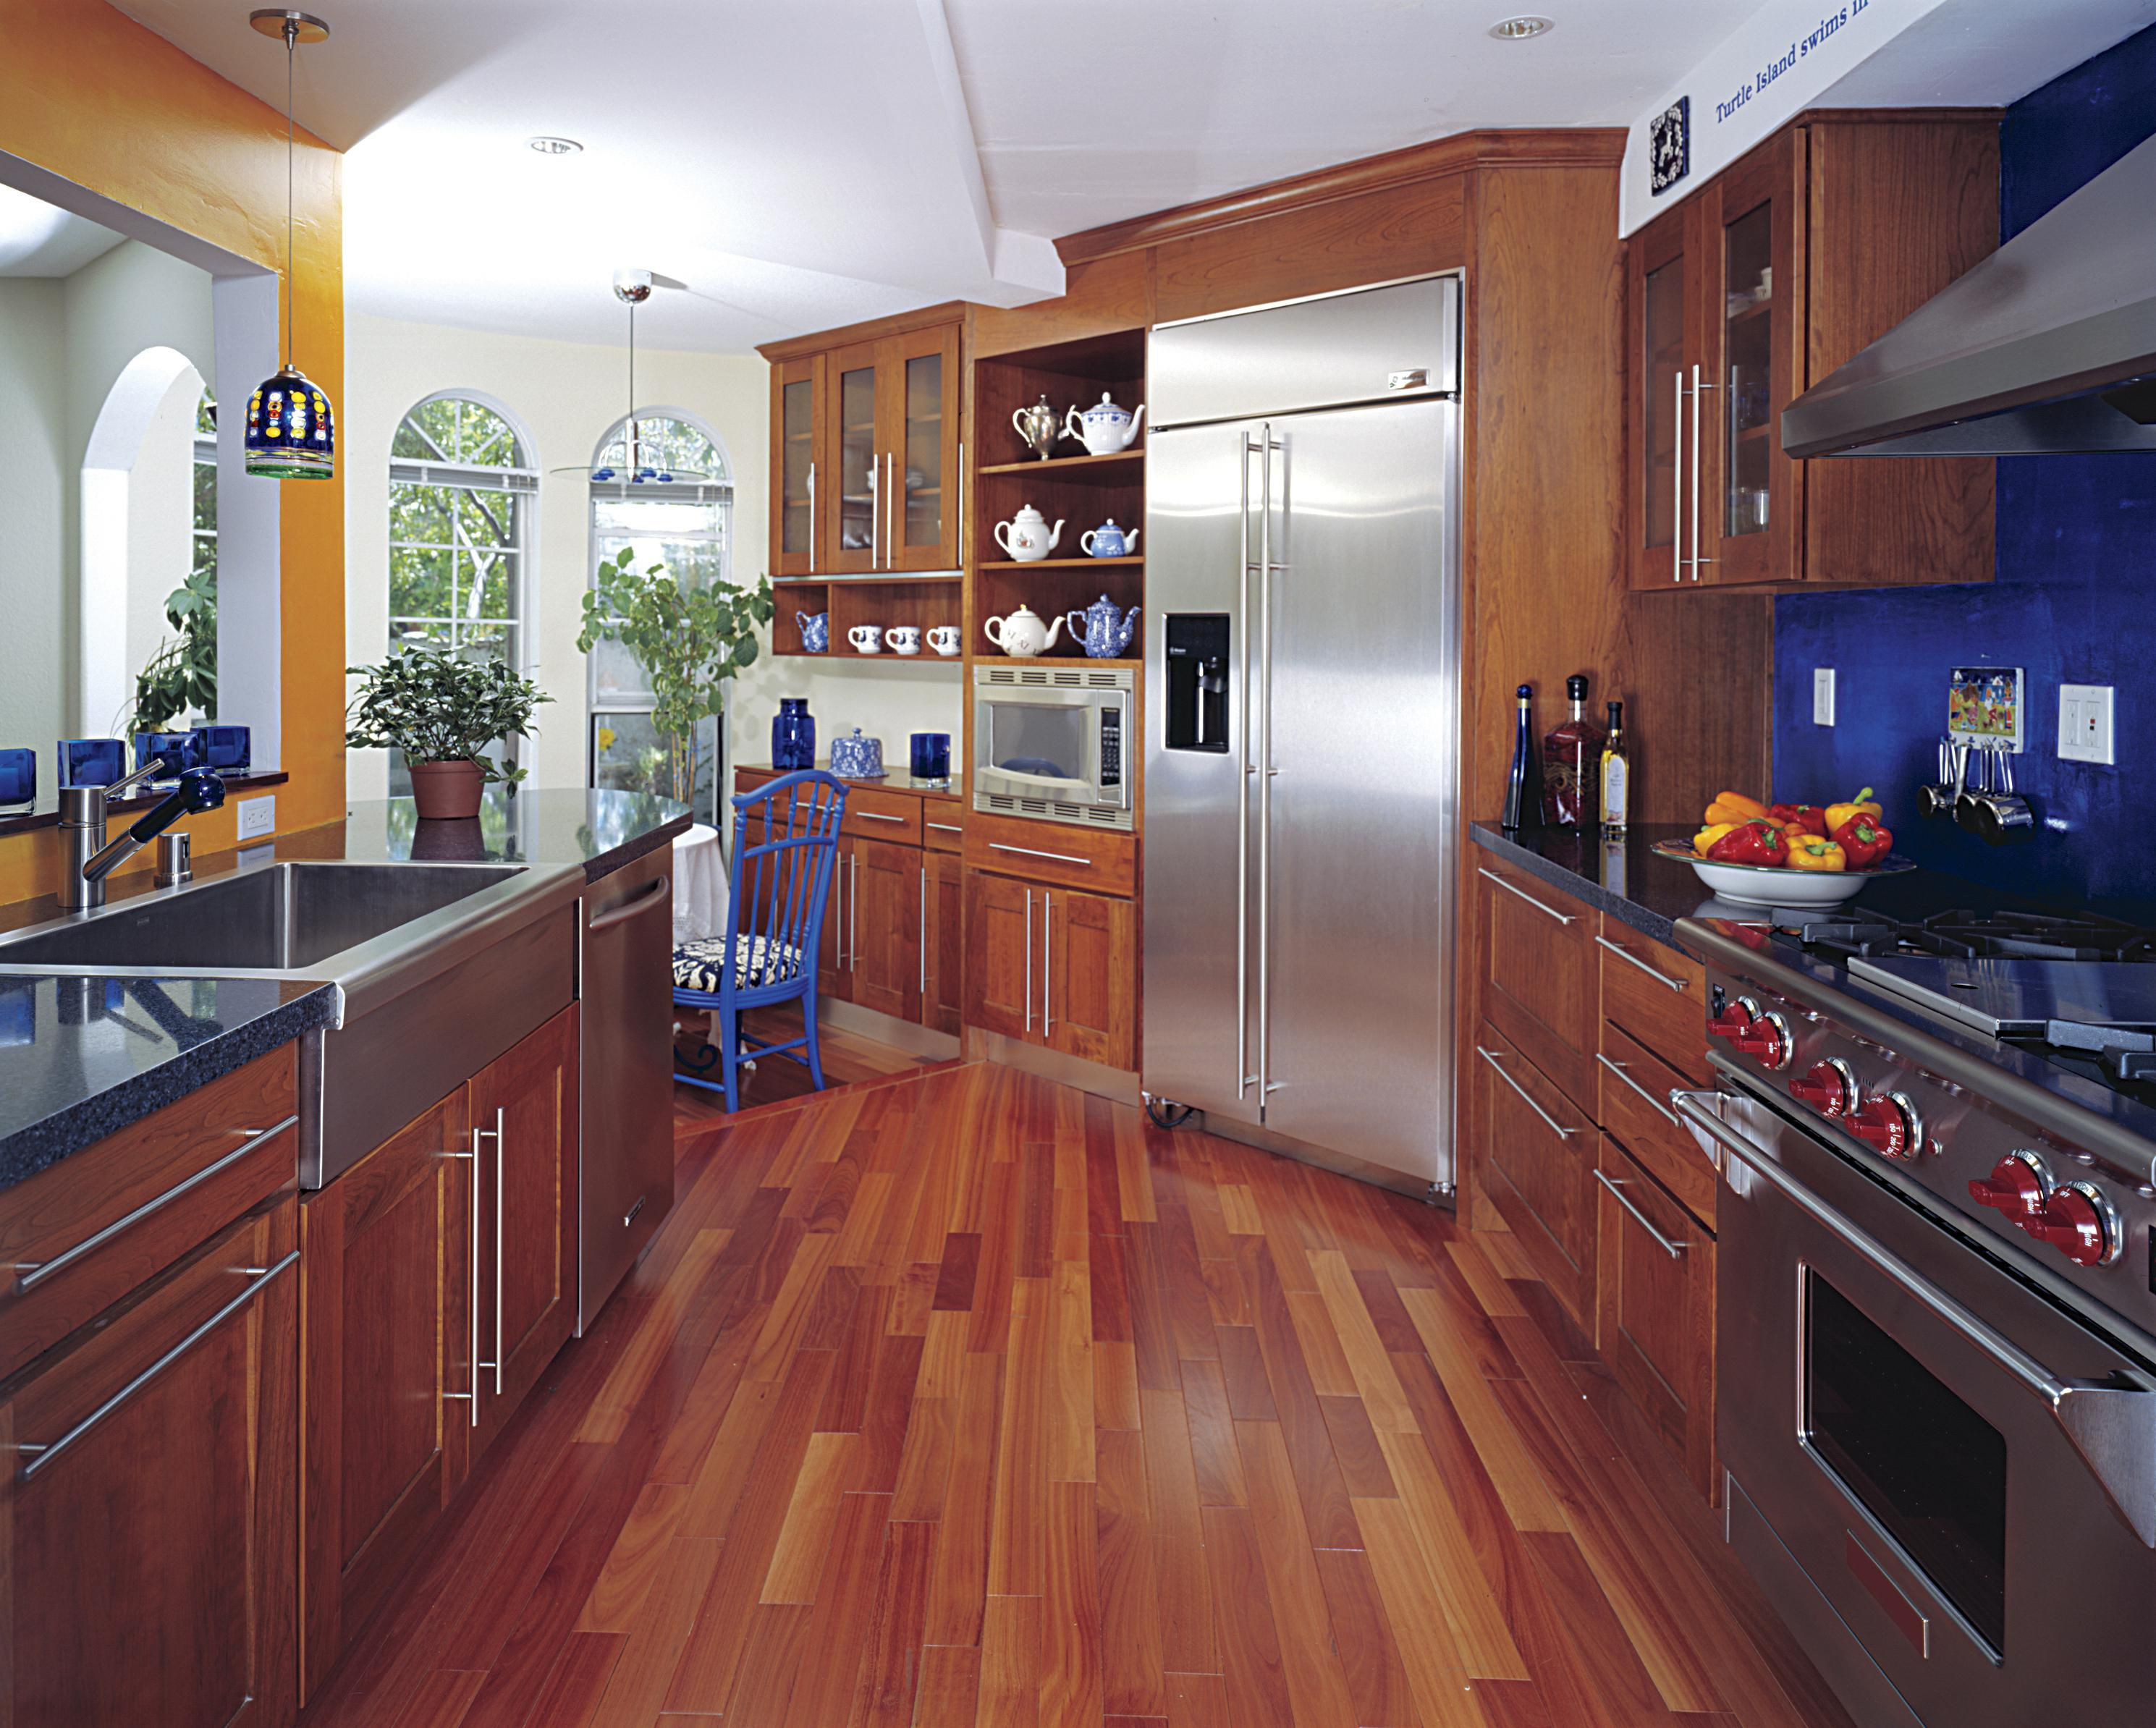 14 Wonderful What Types Of Hardwood Floors are there 2024 free download what types of hardwood floors are there of hardwood floor in a kitchen is this allowed with regard to 186828472 56a49f3a5f9b58b7d0d7e142